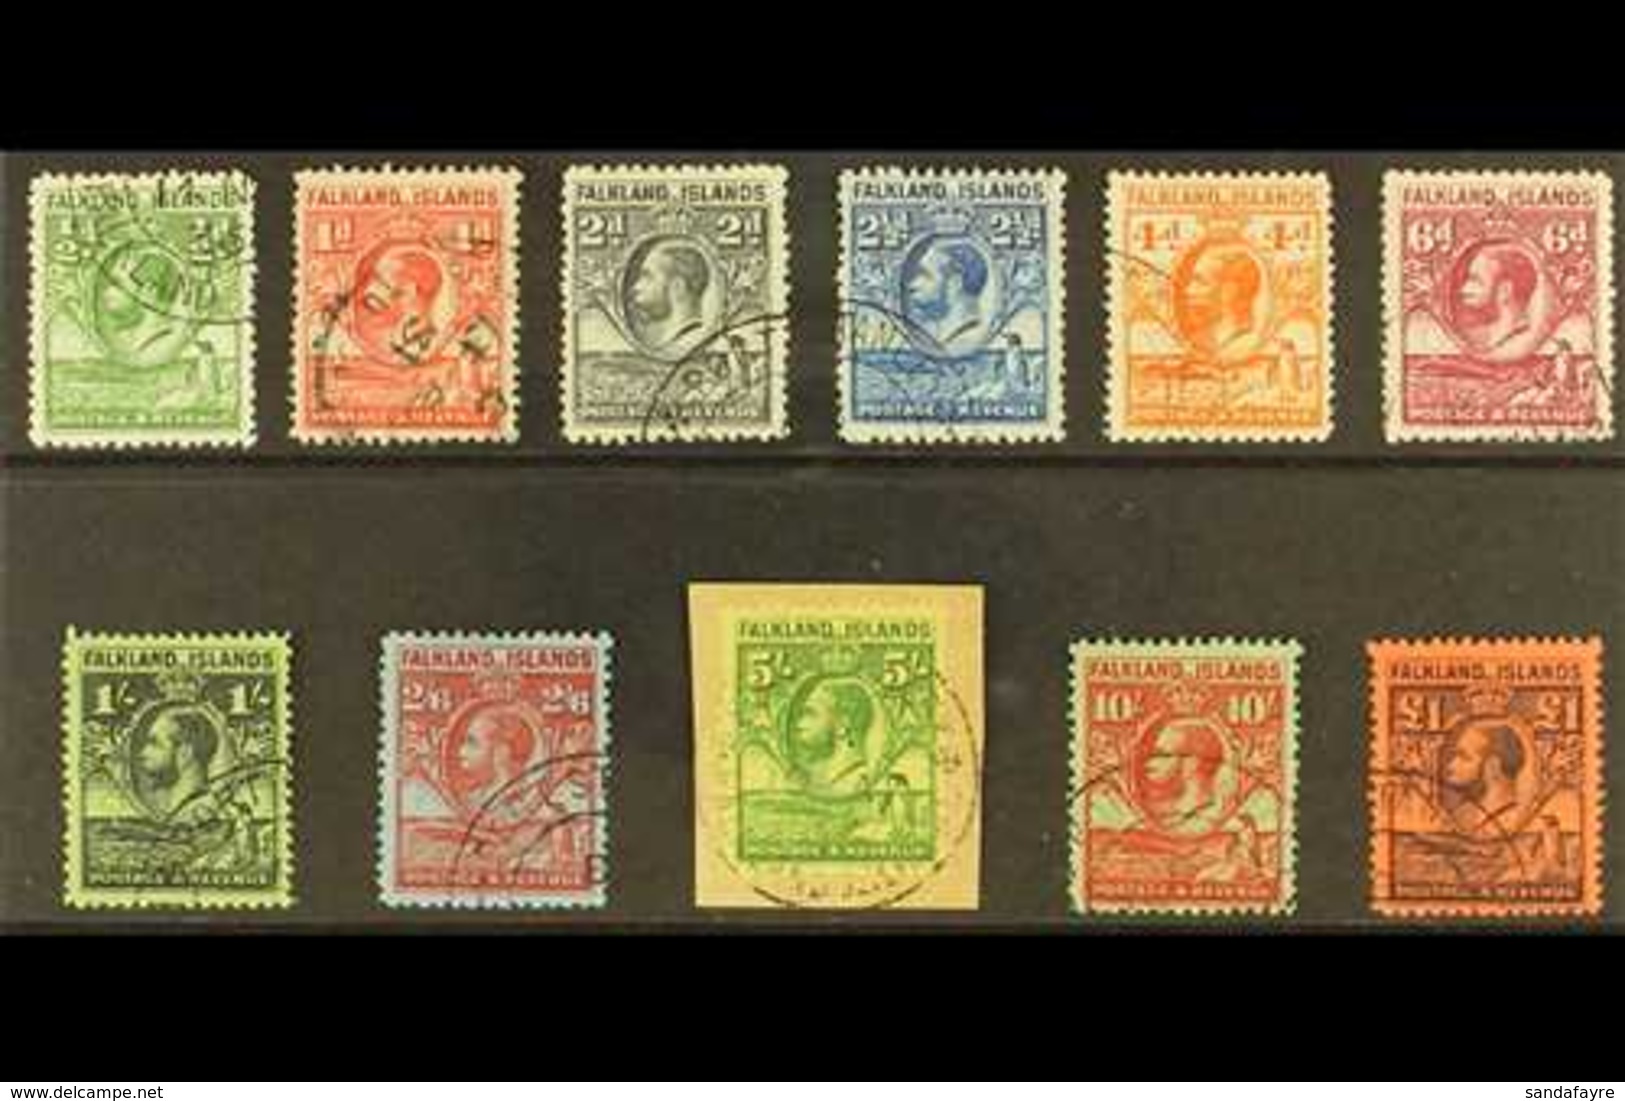 1929-37 KGV "Fin Whale And Gentoo Penguins" Complete Set, SG 116/26, Very Fine Used, The 5s Tied On Small Piece. Lovely! - Falklandinseln